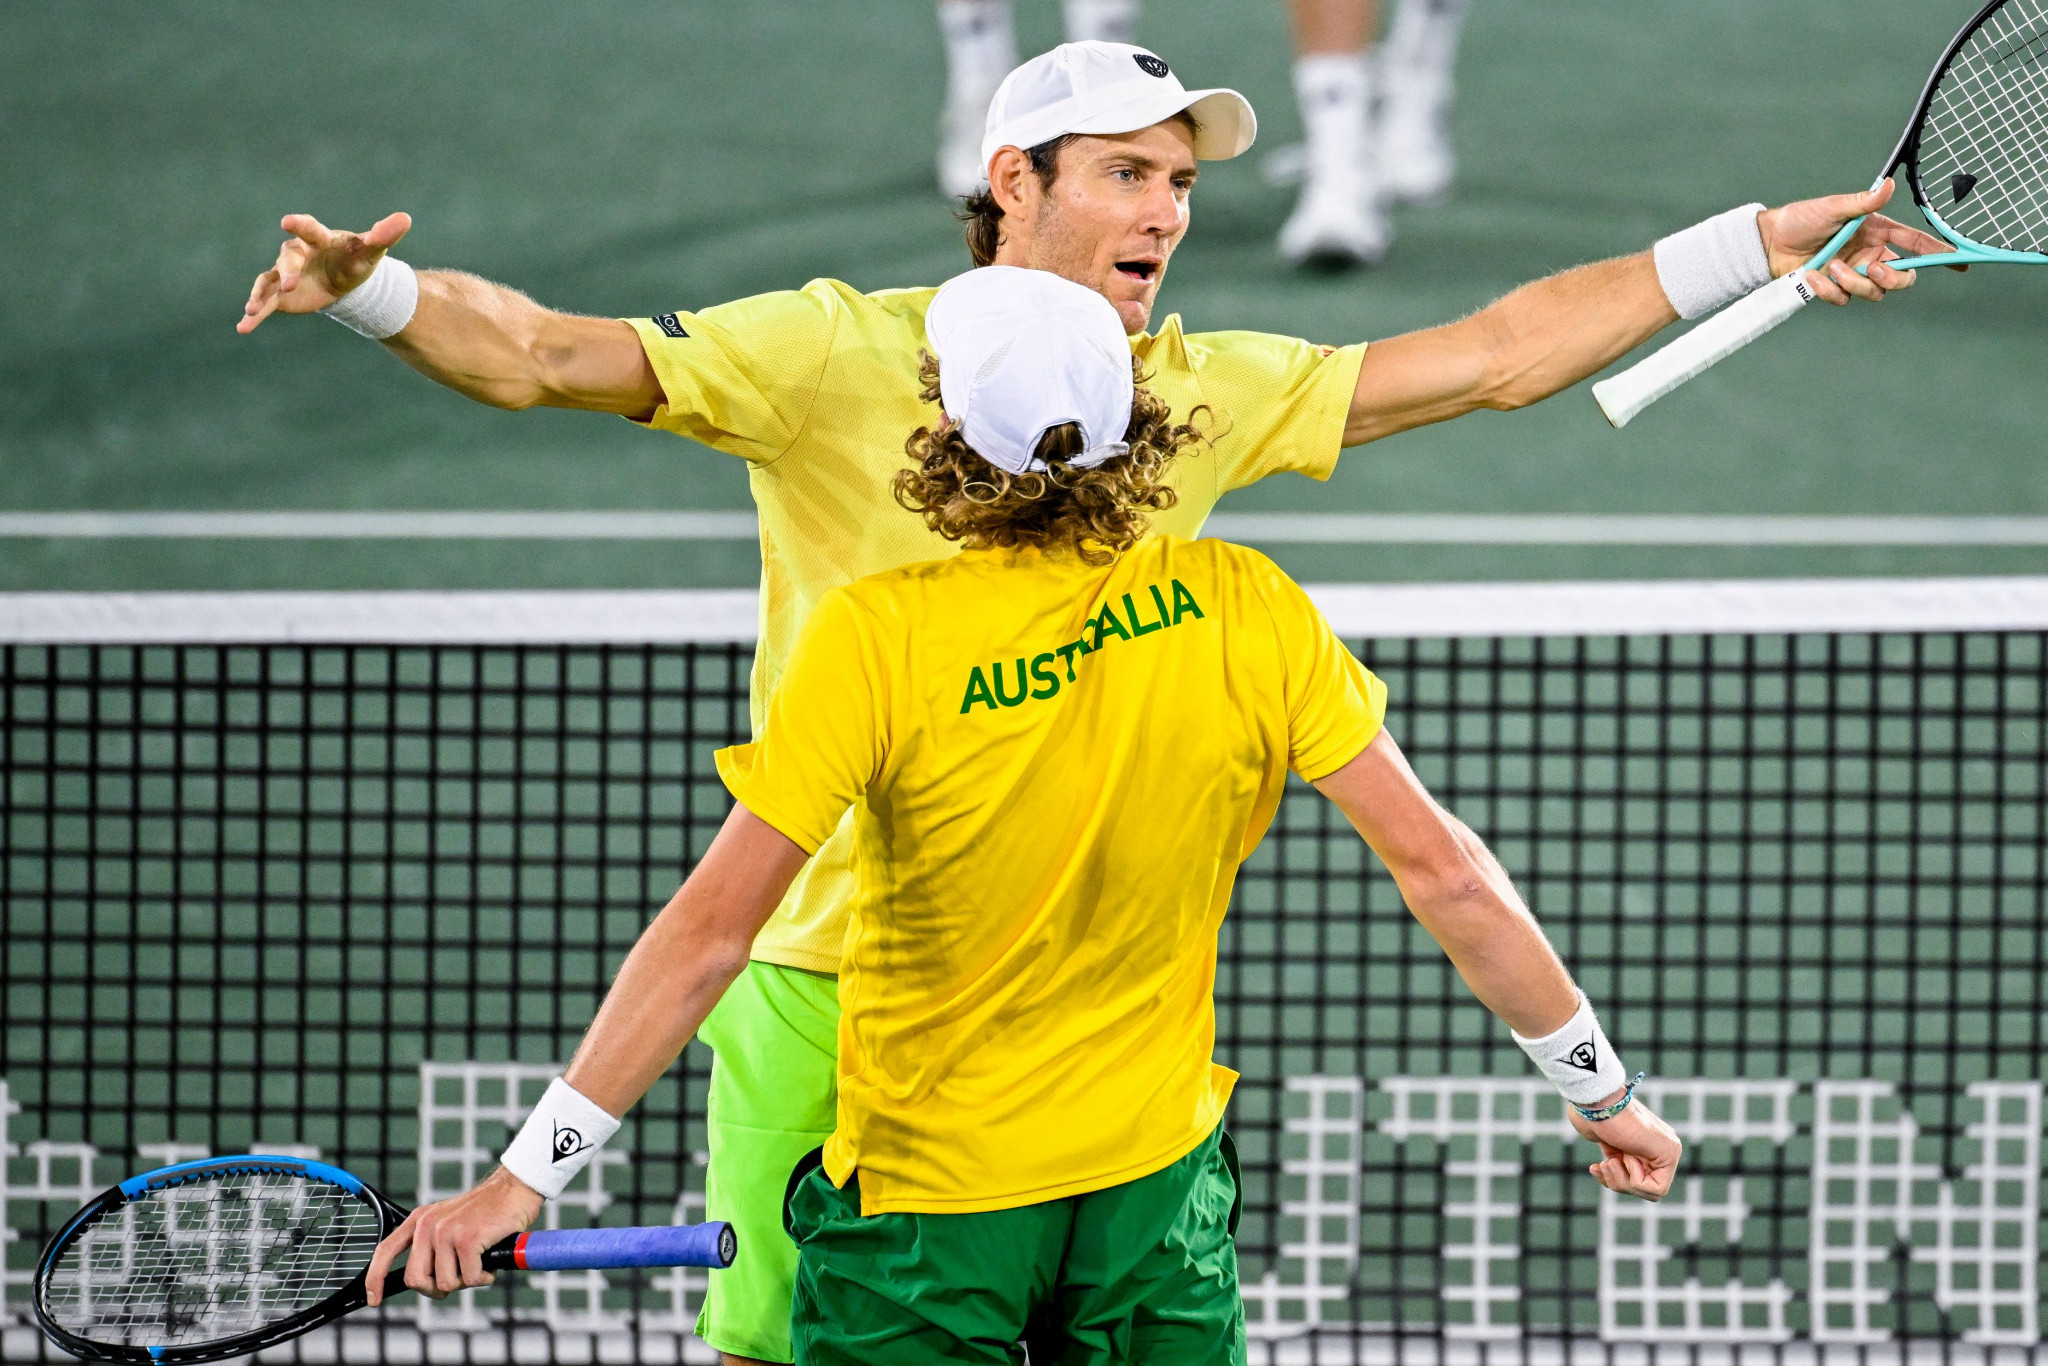 Australia dominant in opening Davis Cup Finals group-stage match